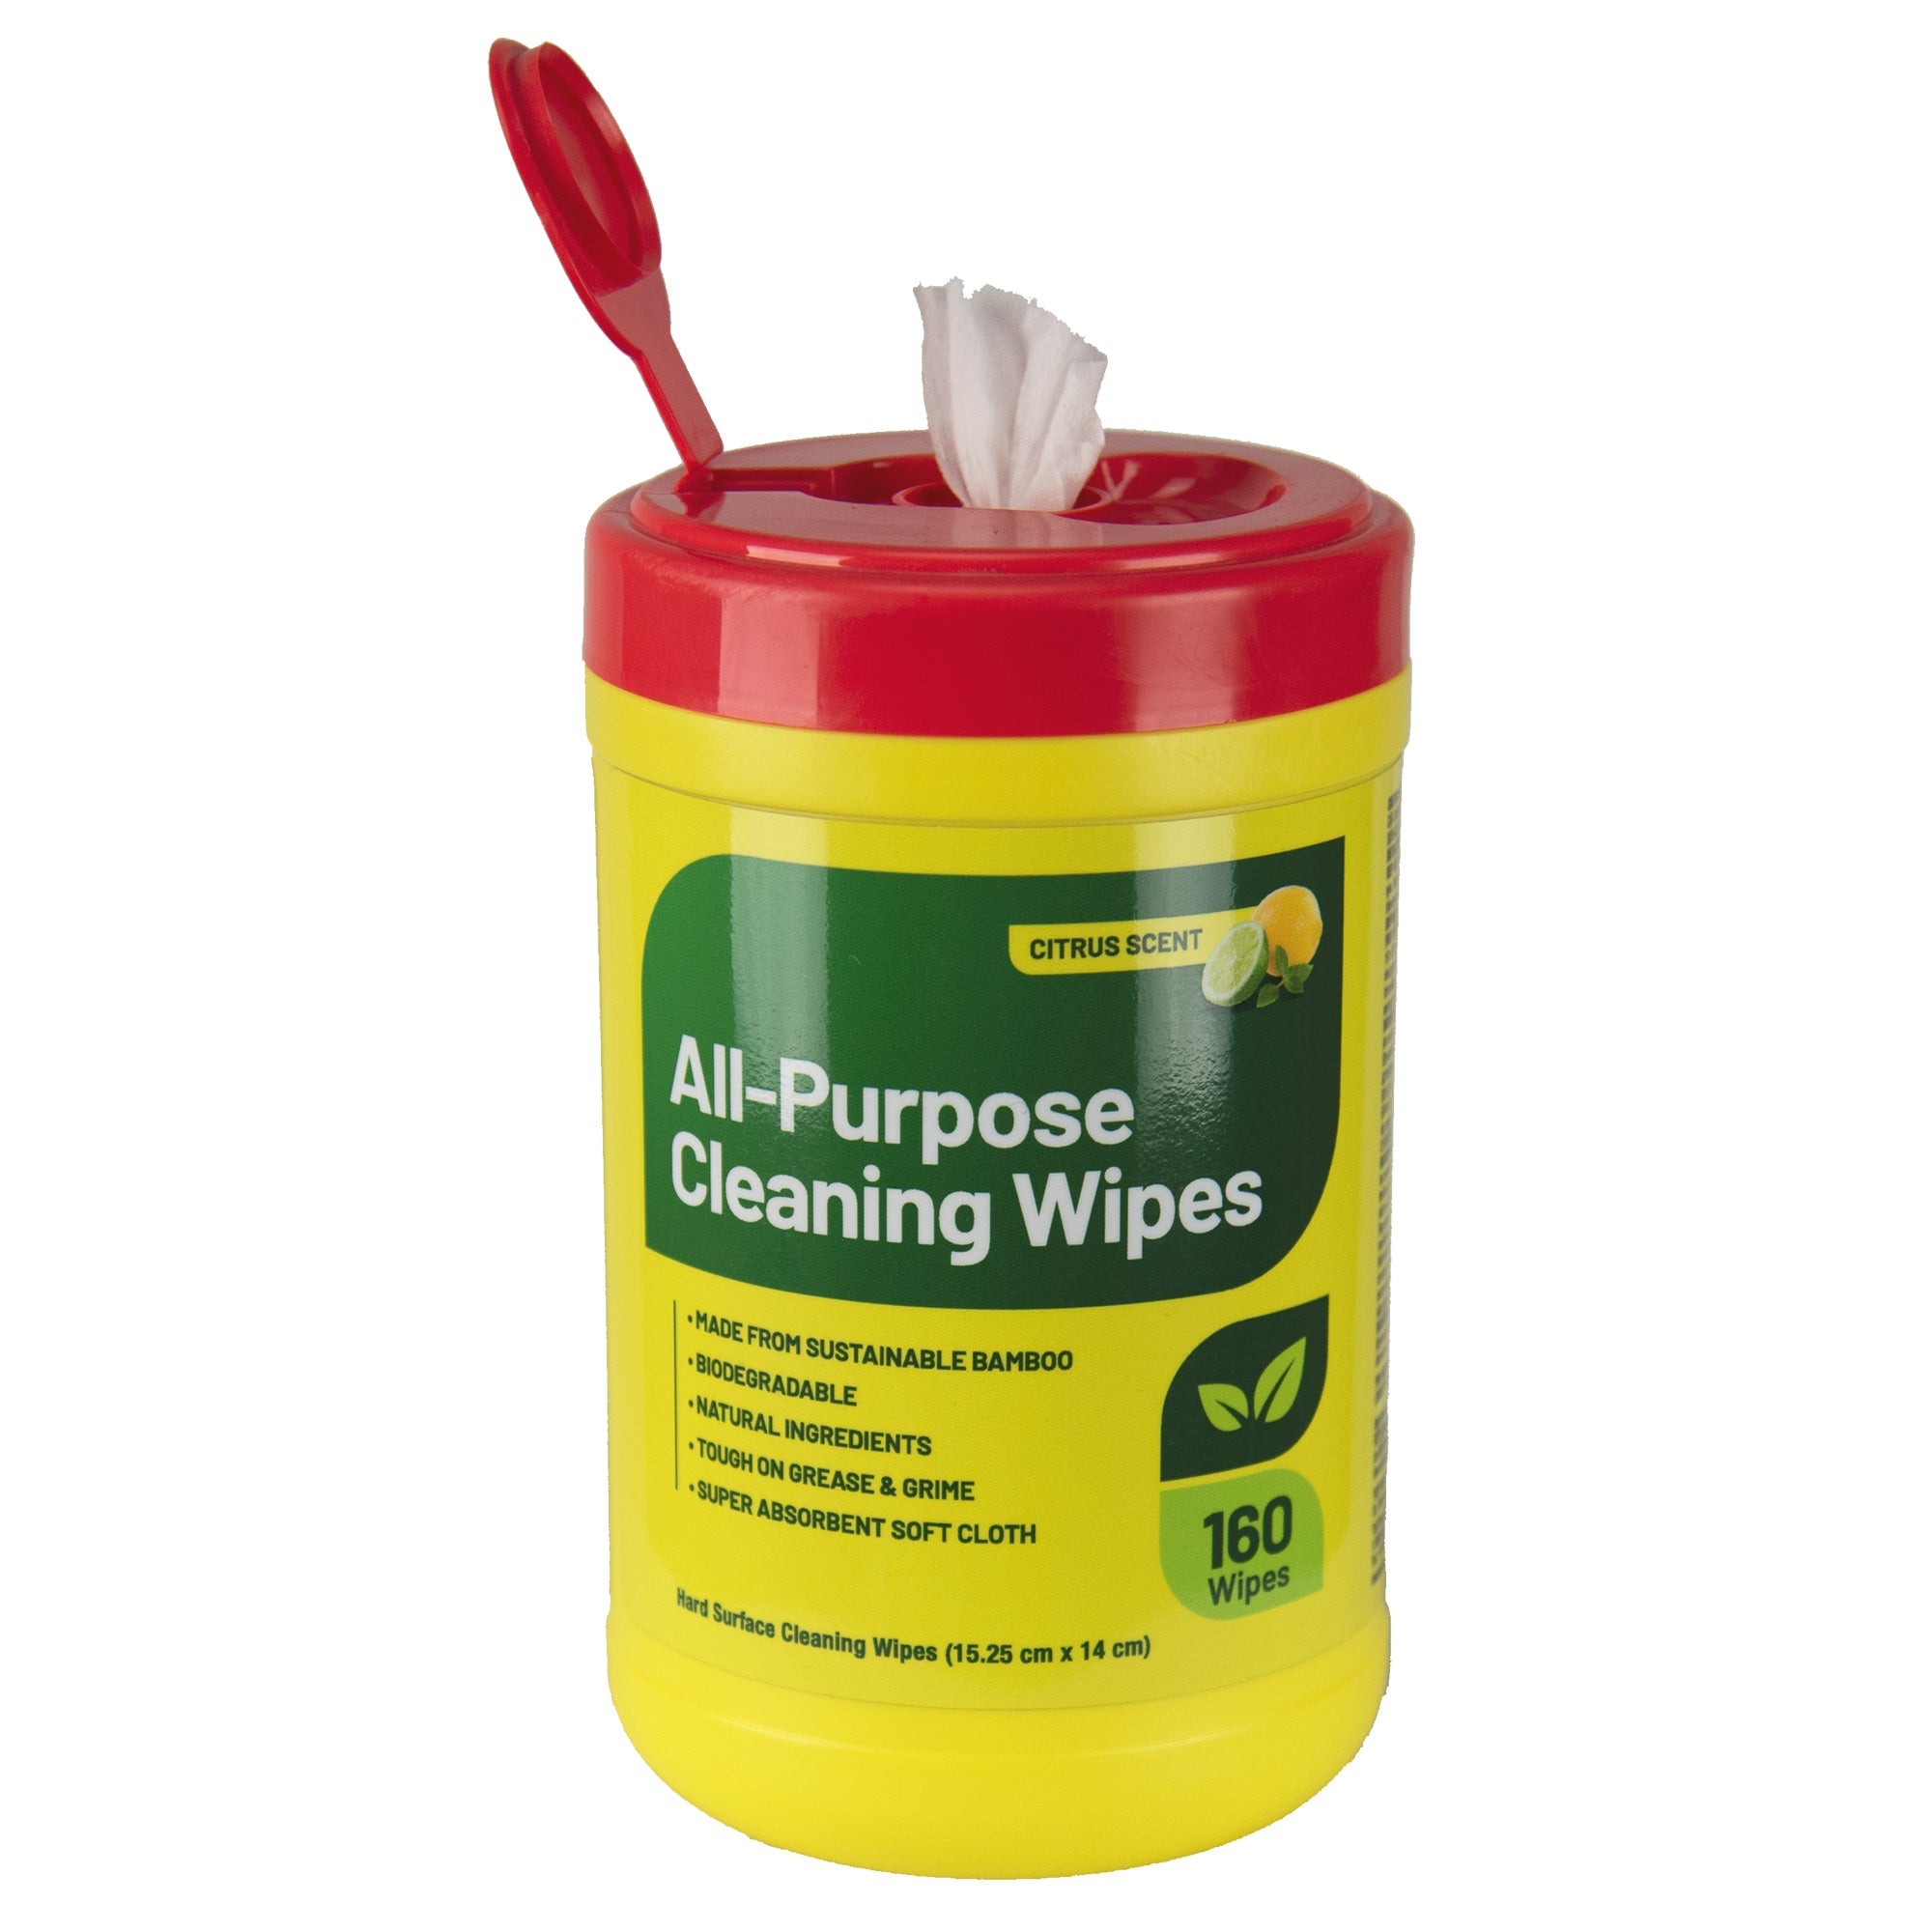 All-Purpose Cleaning Wipes, canister of 160 wipes with the lid open and one wipe sticking out the top on a white background